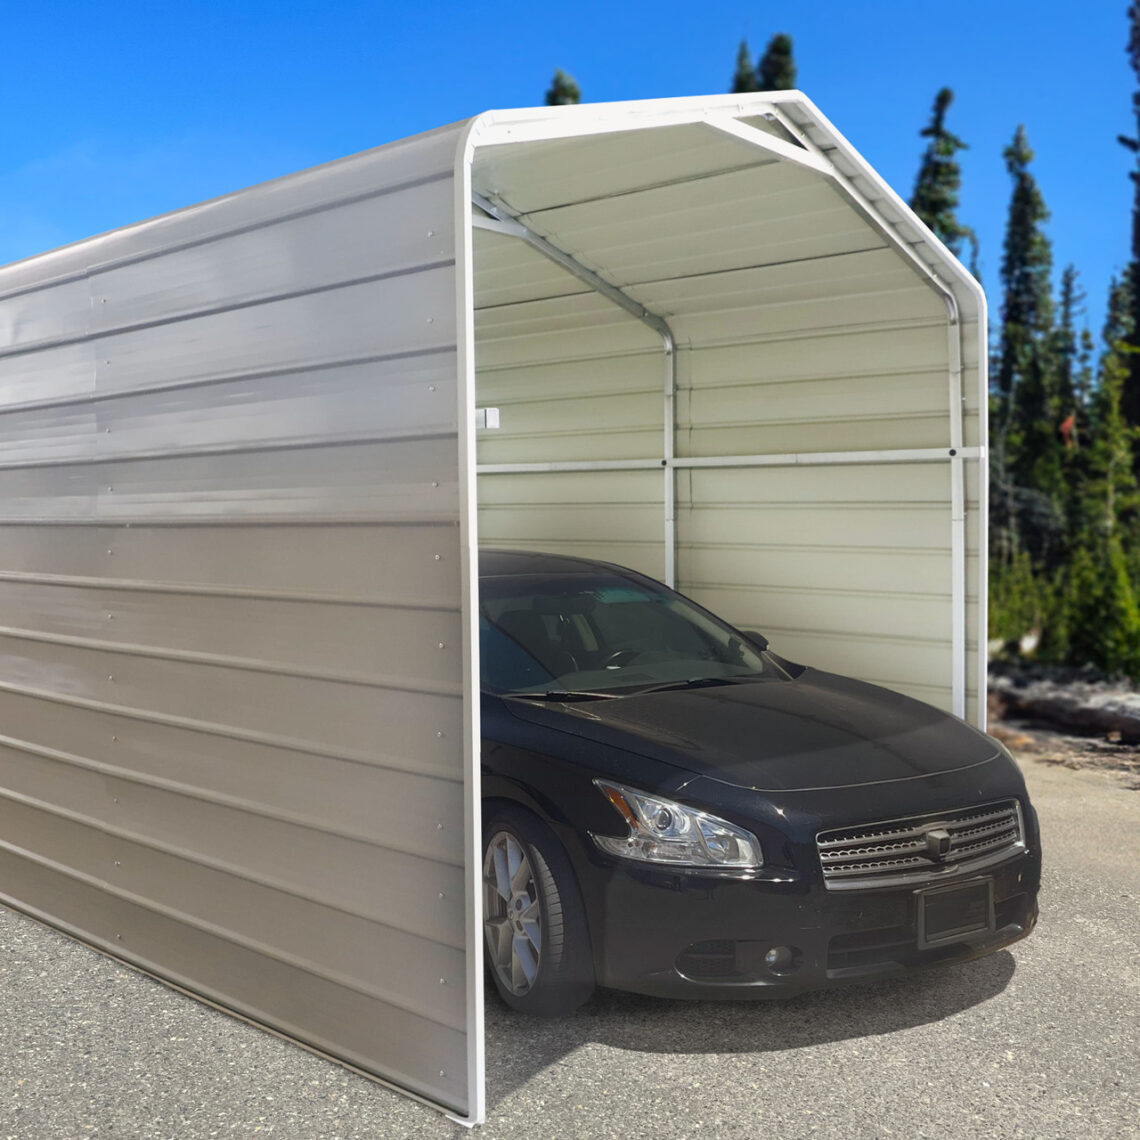 What is a Carport? Explained